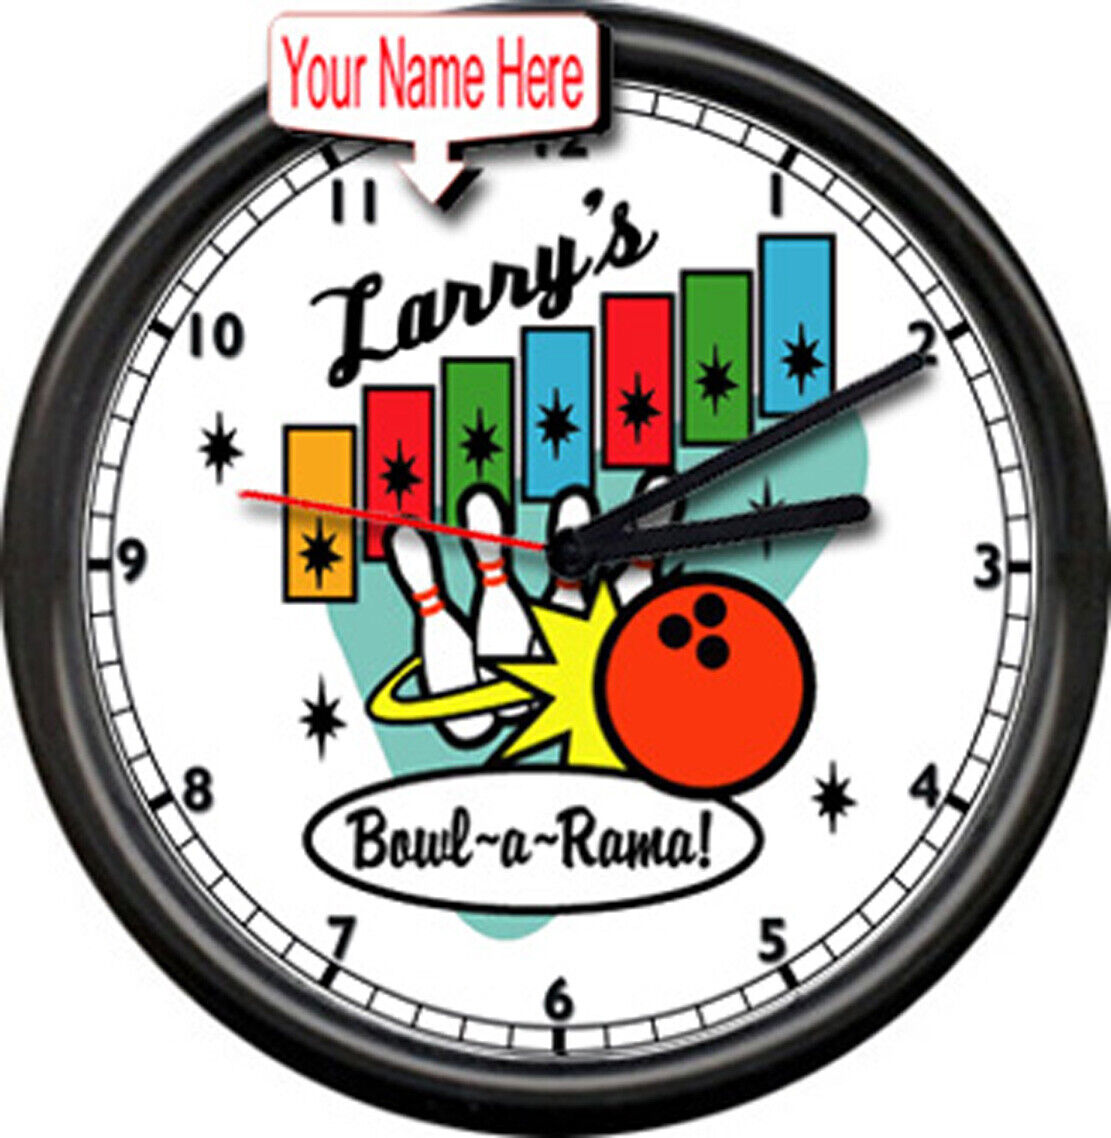 Bowling Alley Personalized Your Name Bowl-A-Rama Bowler Retro Sign Wall Clock